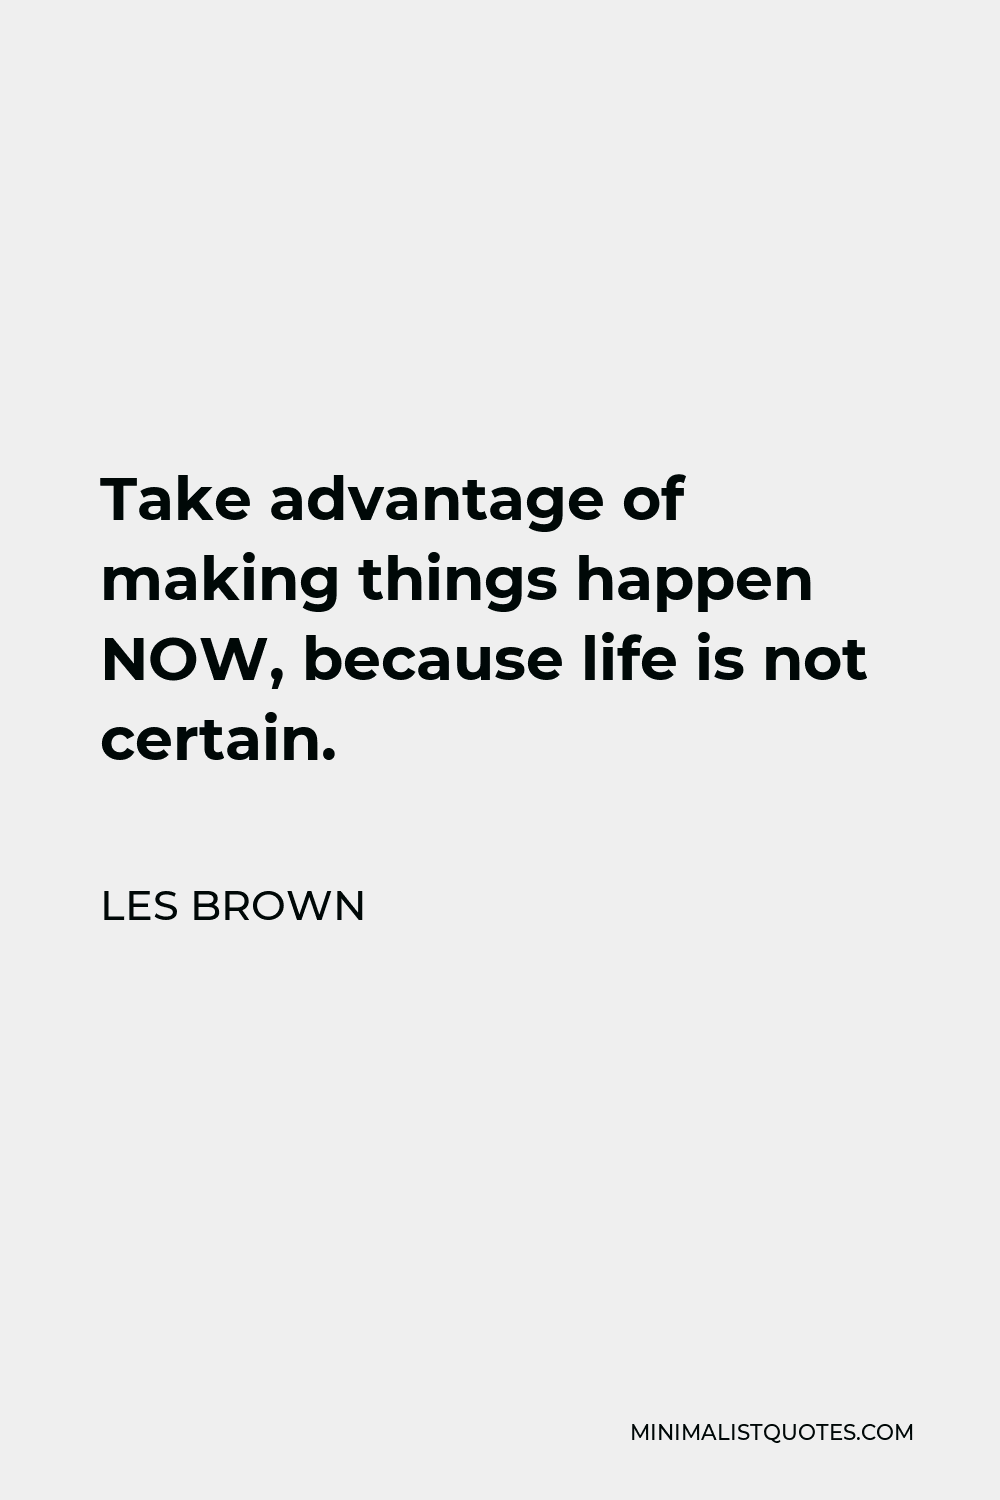 Les Brown Quote - Take advantage of making things happen NOW, because life is not certain.